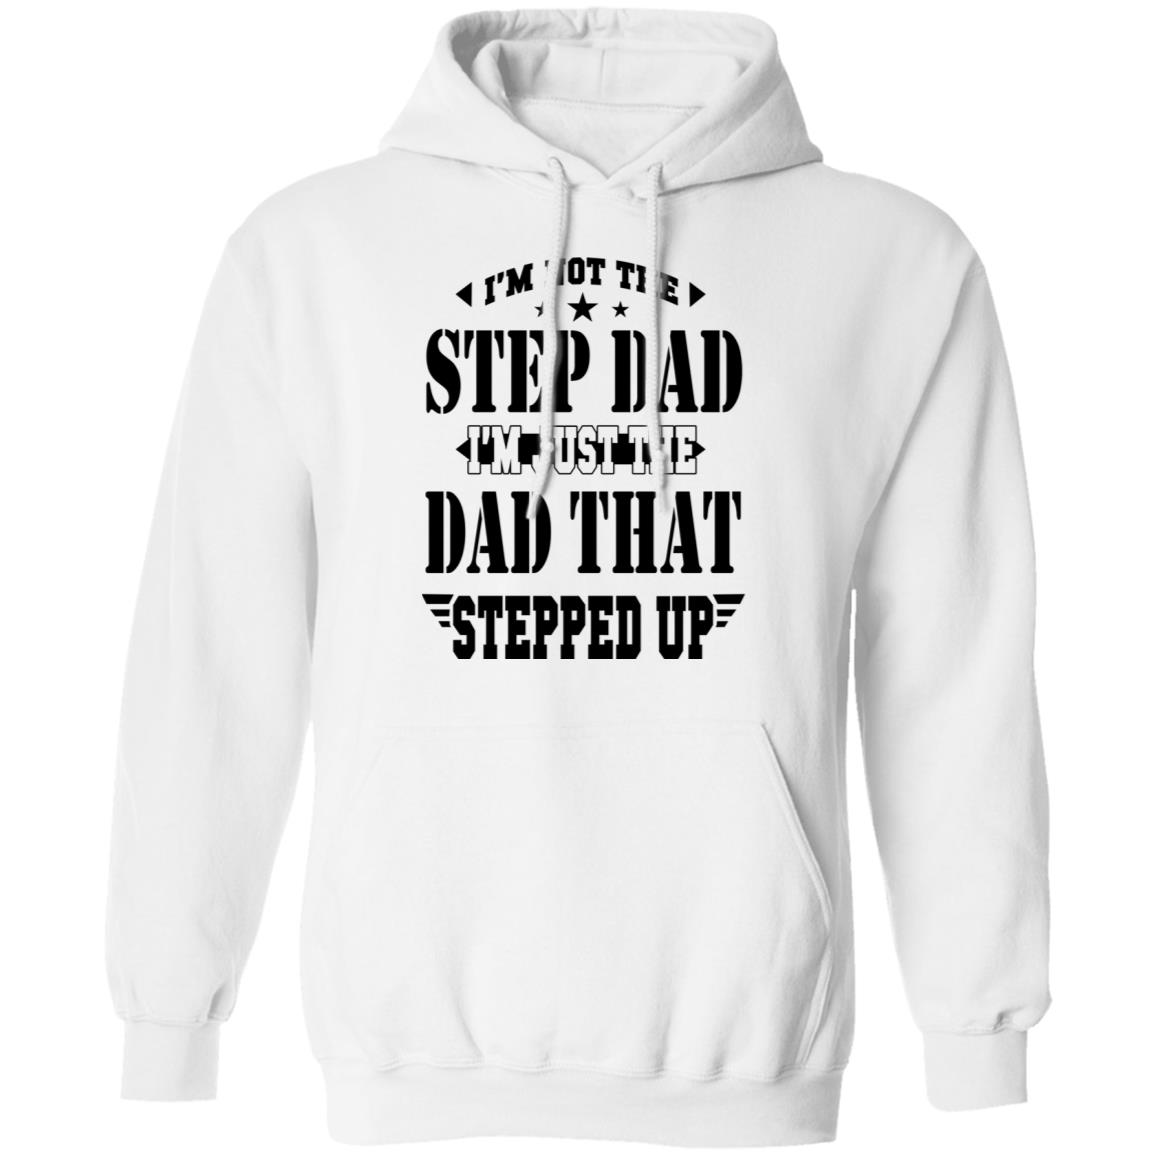 Im Not The Step Dad Im Just The Dad That Stepped Up Shirt